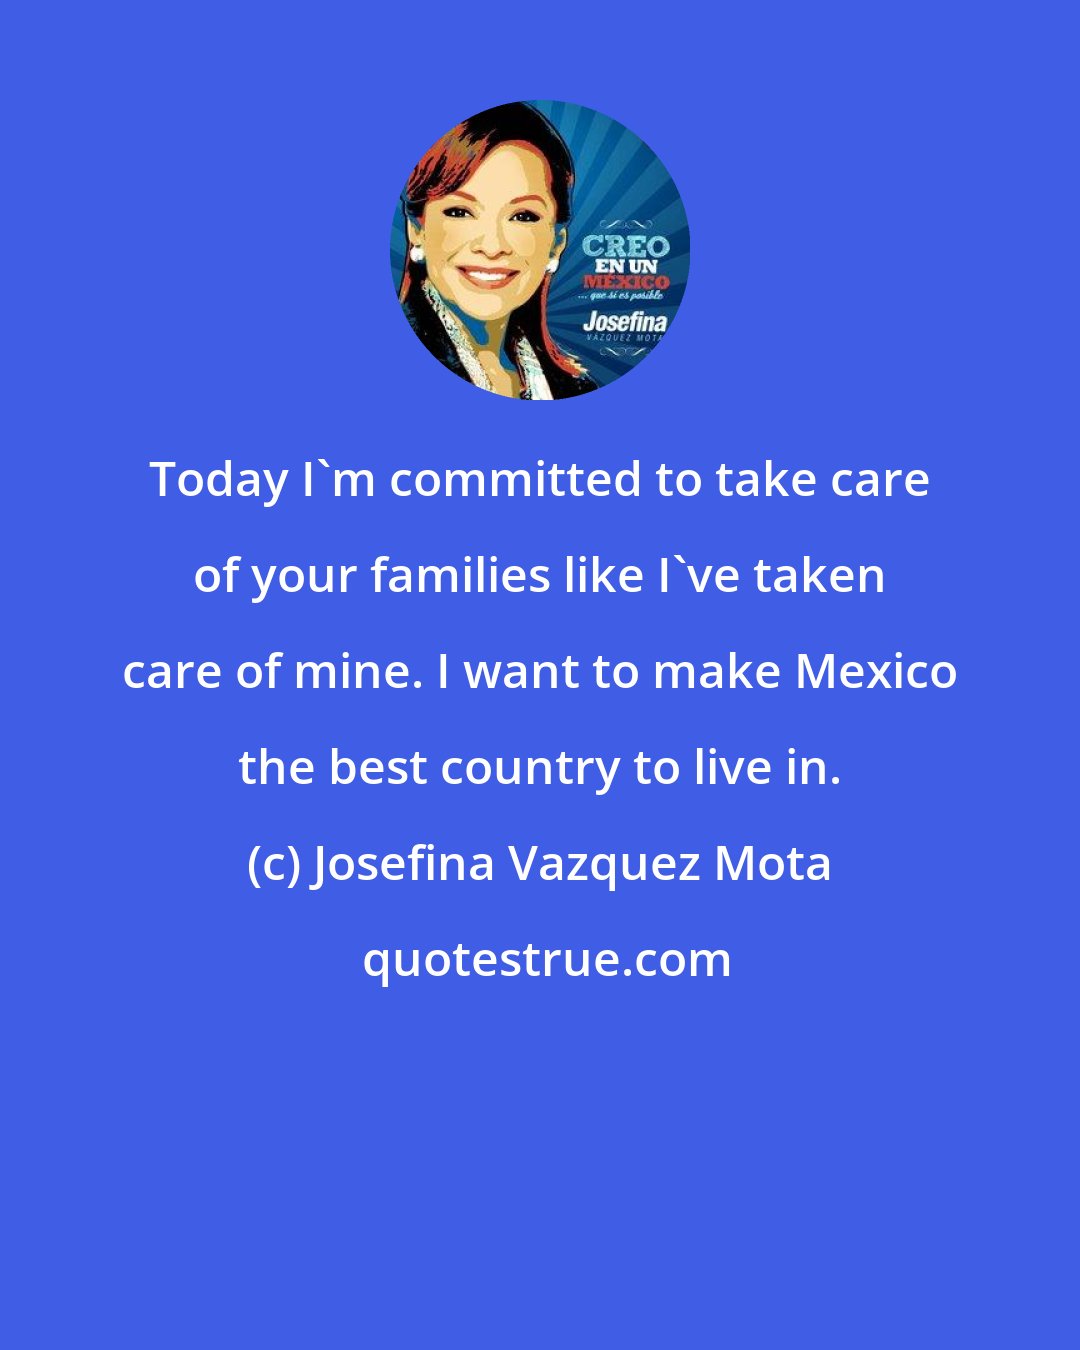 Josefina Vazquez Mota: Today I'm committed to take care of your families like I've taken care of mine. I want to make Mexico the best country to live in.